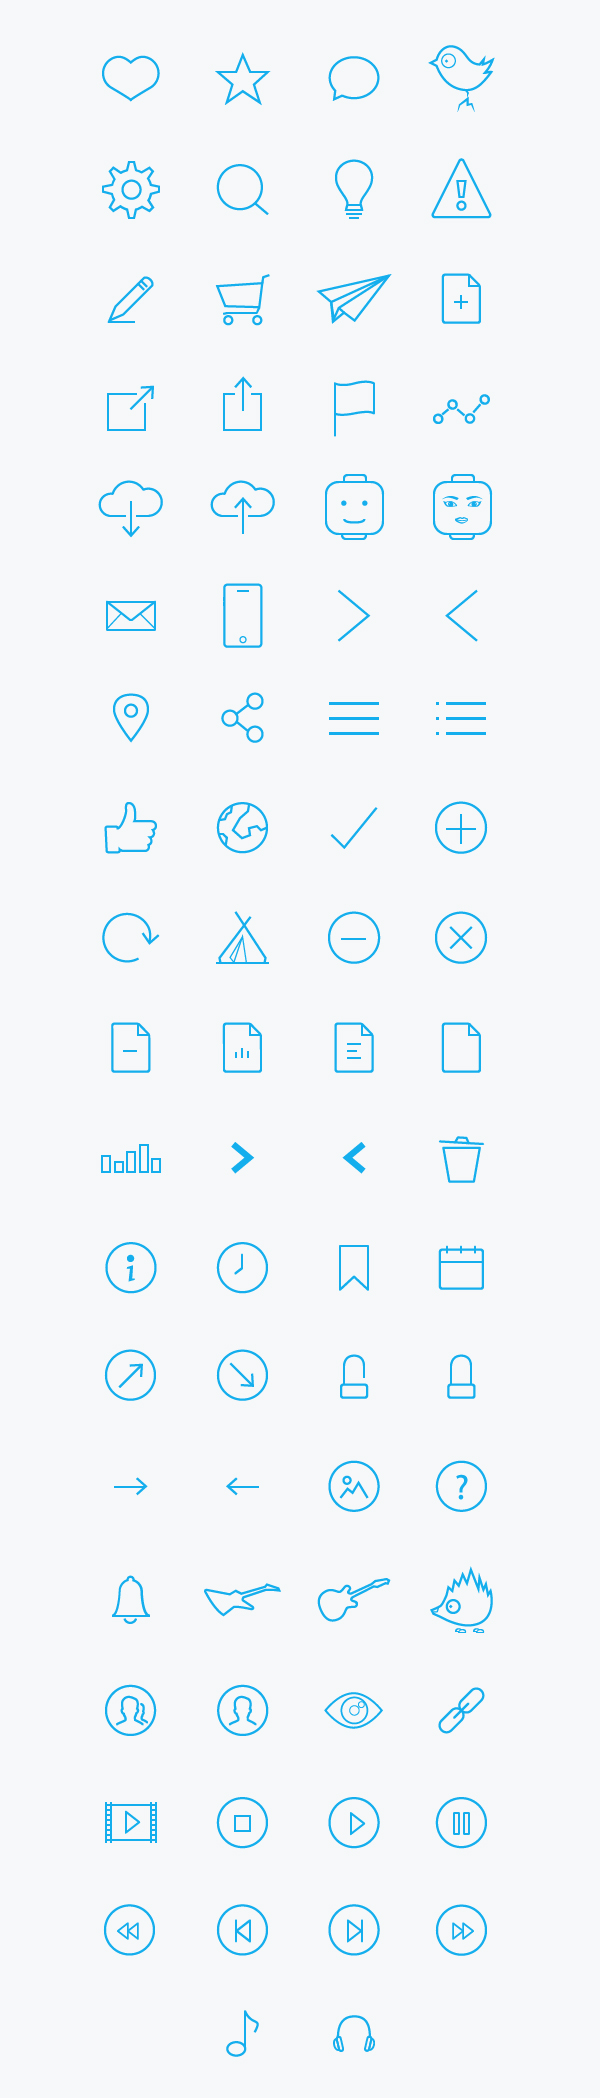 Bollhavet Free Outline Icons